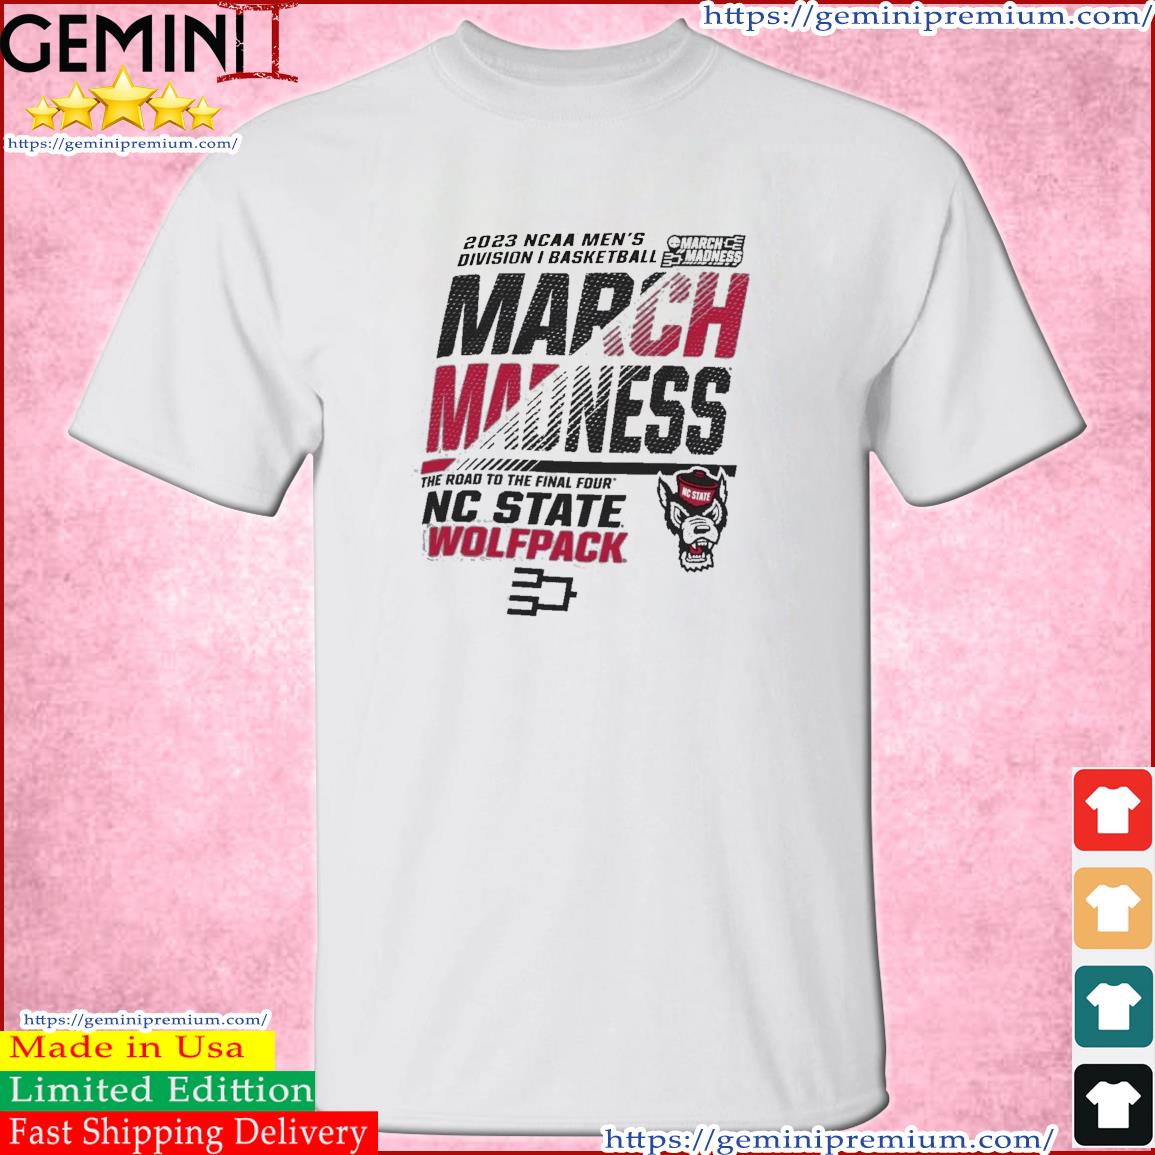 NC State Wolfpack 2023 NCAA Men's Basketball March Madness Shirt